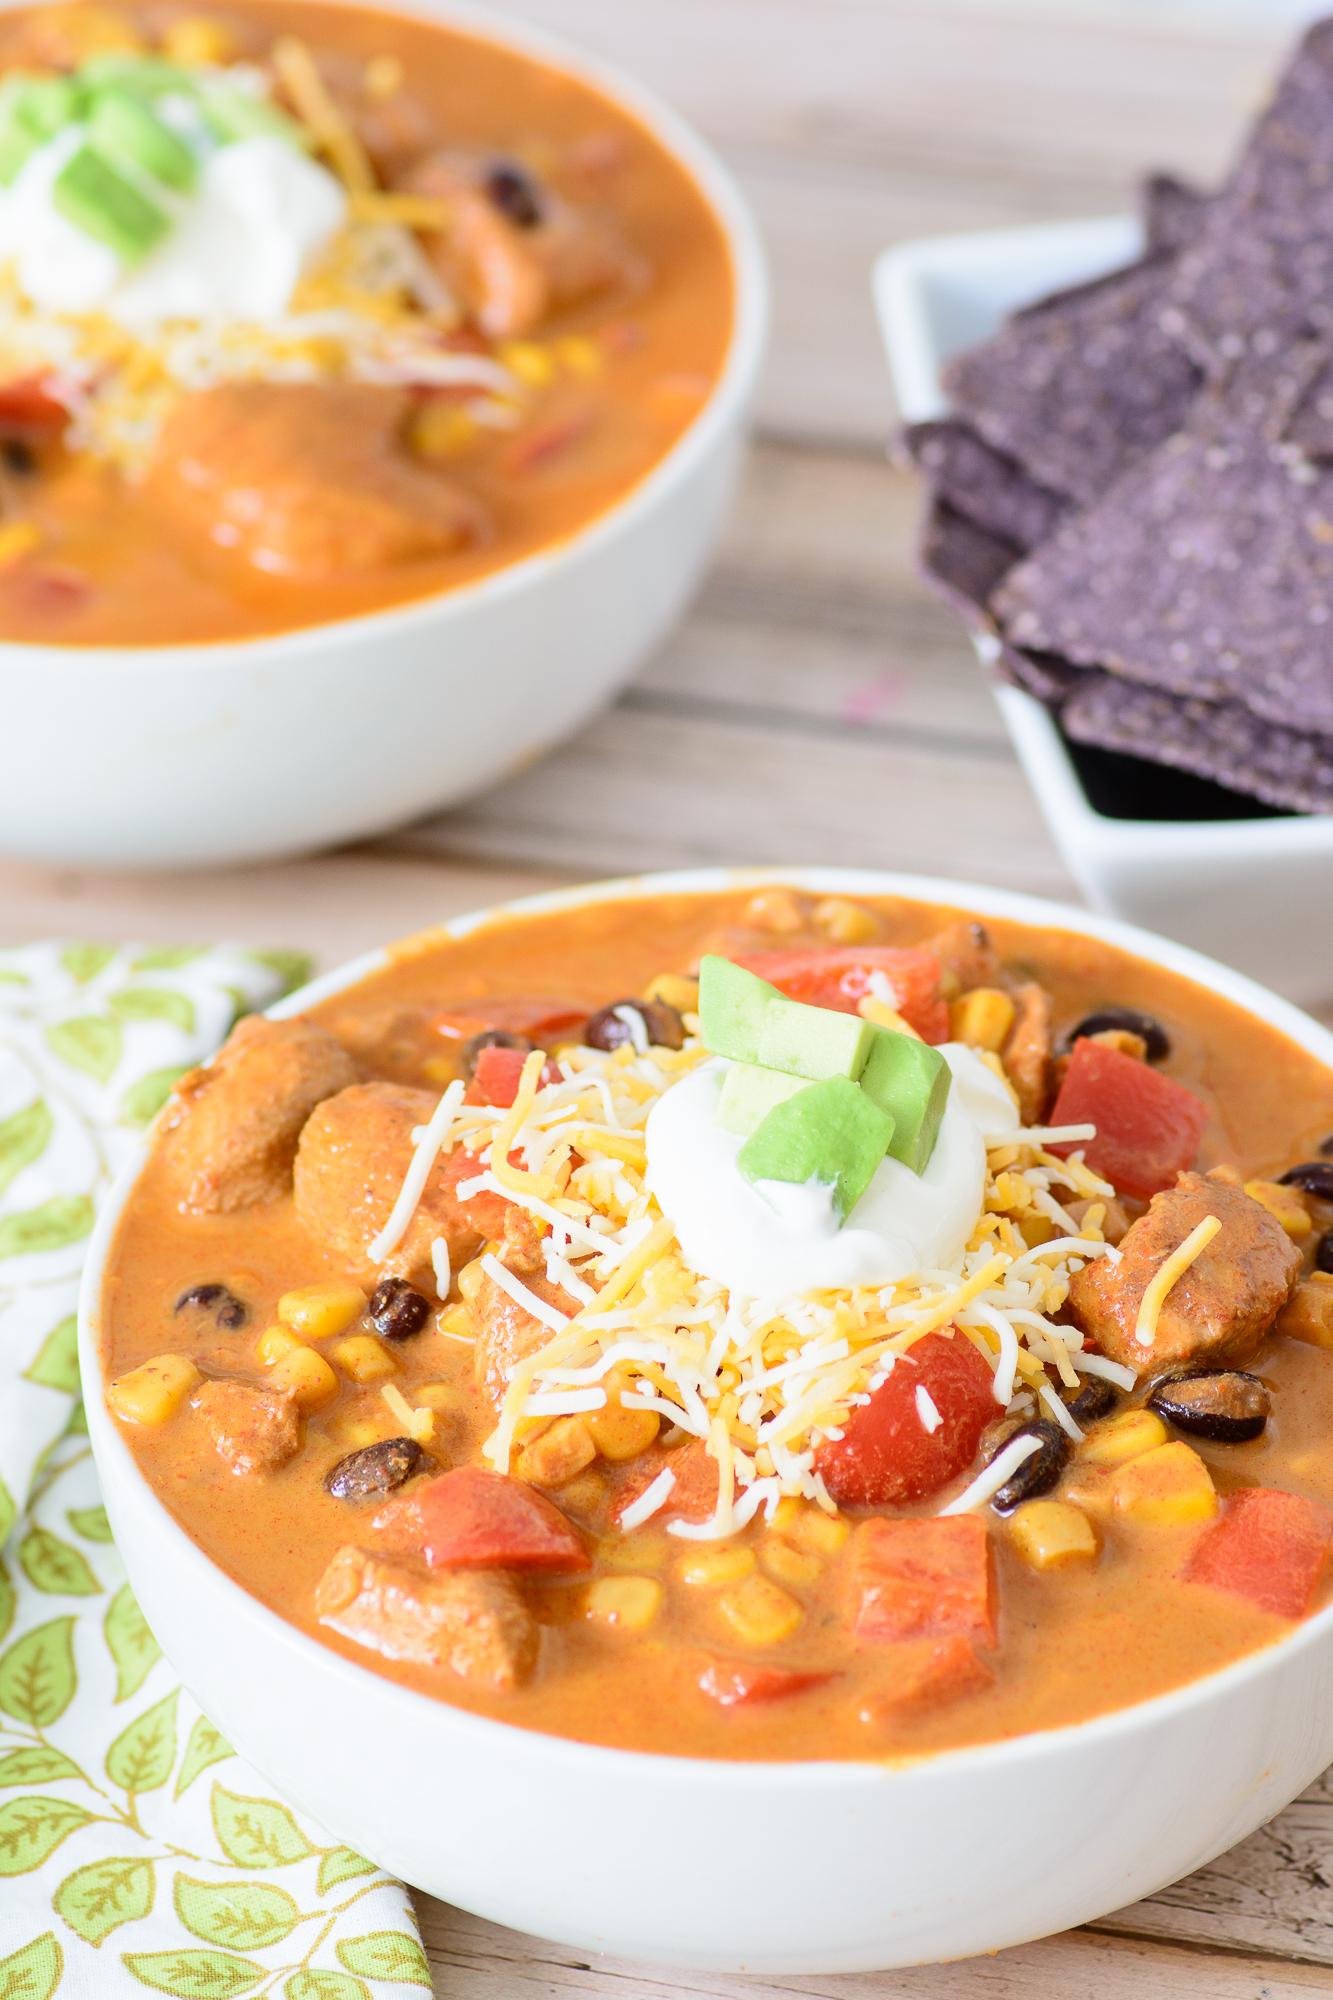 My favorite post from last week's Linky Party is this delicious Baja Chicken Enchilada Soup from Almost Supermom! It's delicious, hearty, and perfect for the cold nights ahead! Find the link here.